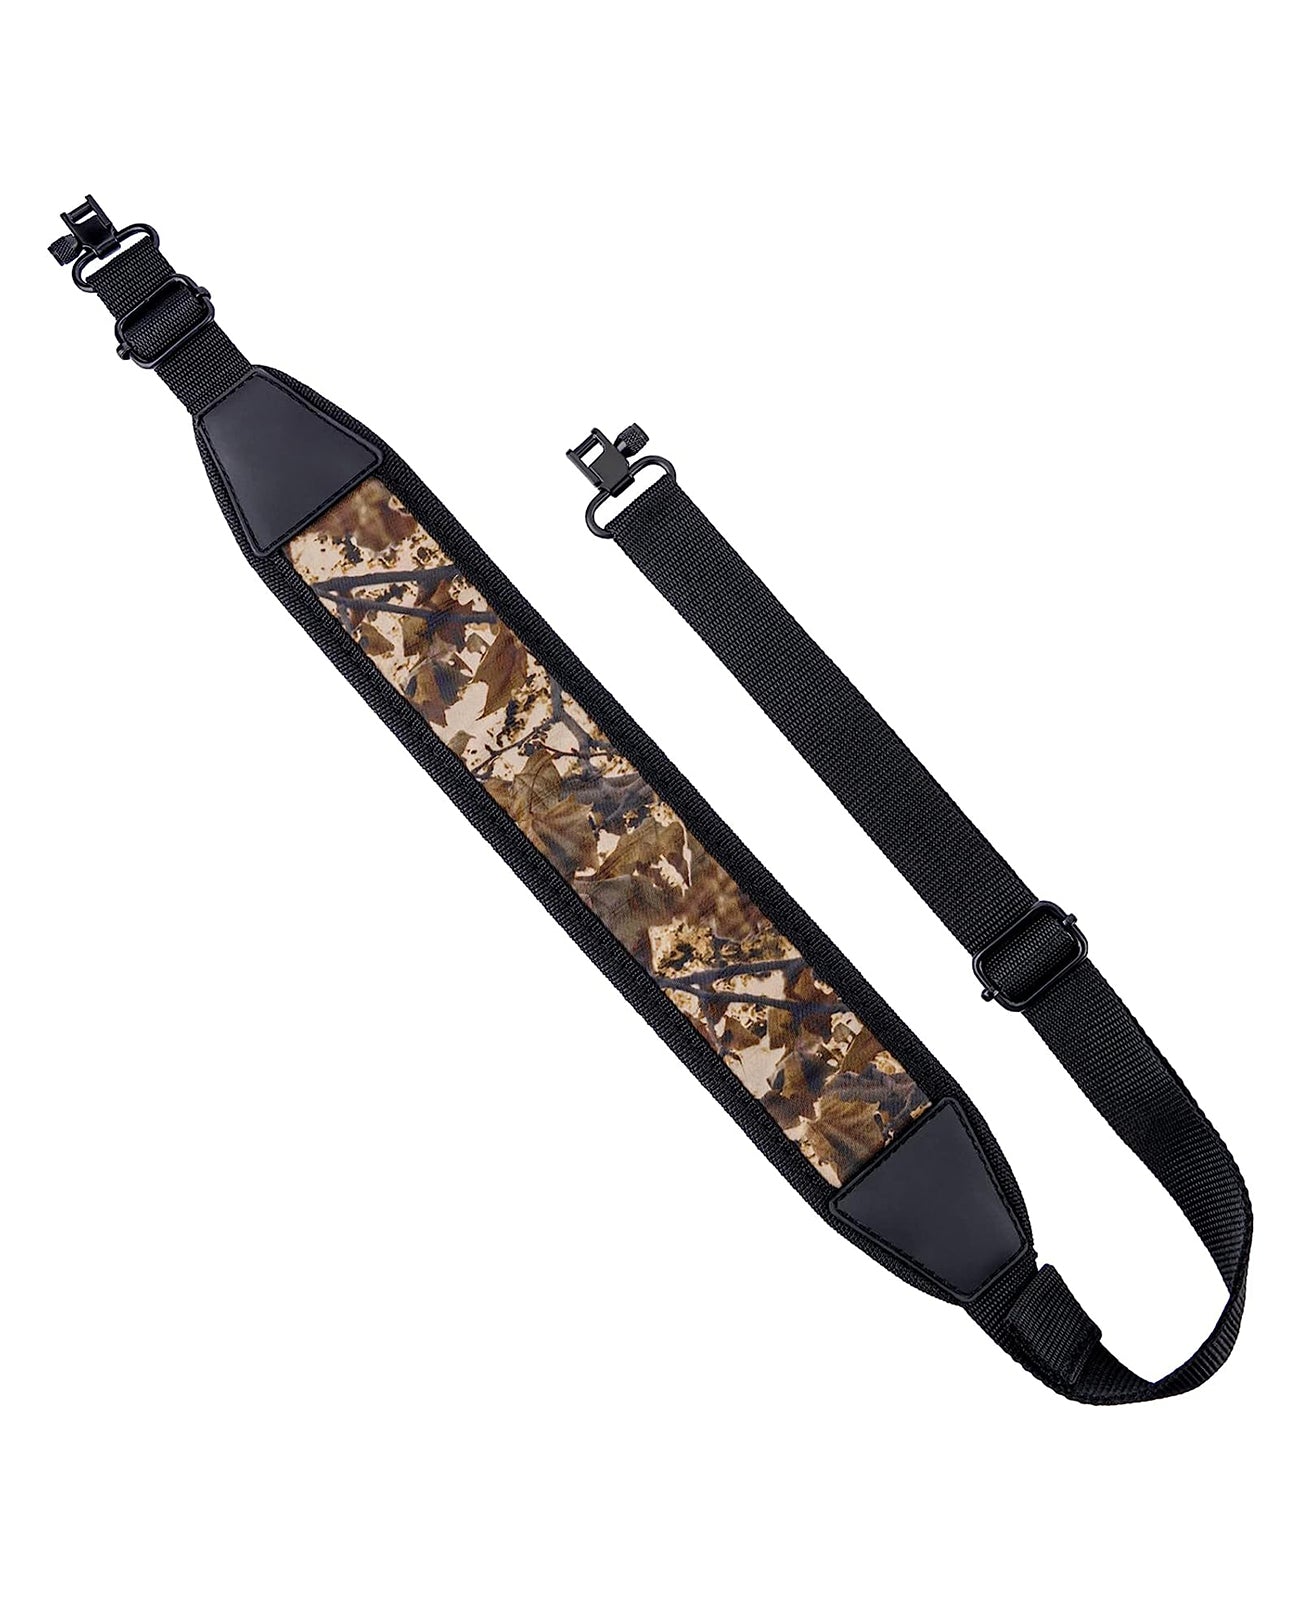 2 point rifle sling with sling swivels for outdoors